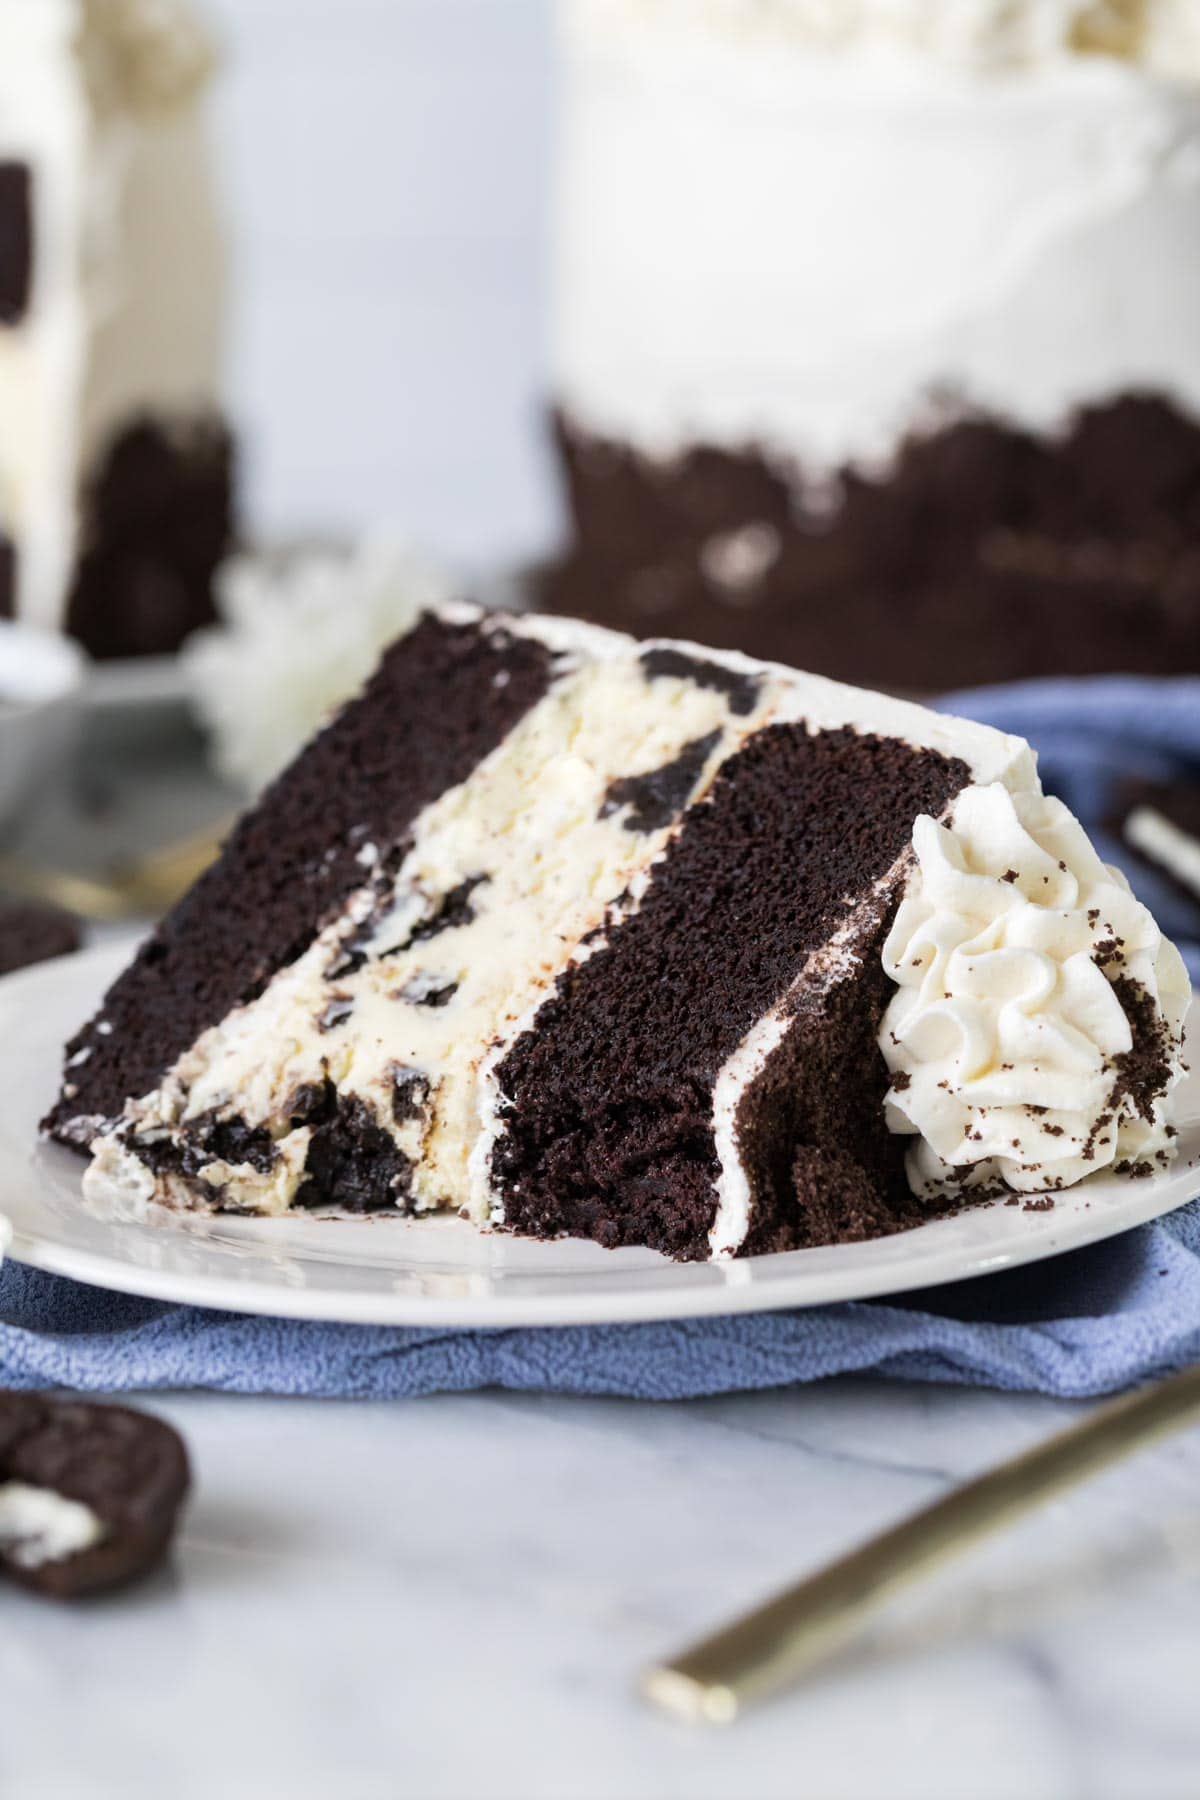 Slice of chocolate cake with an Oreo cheesecake filling missing a bite.